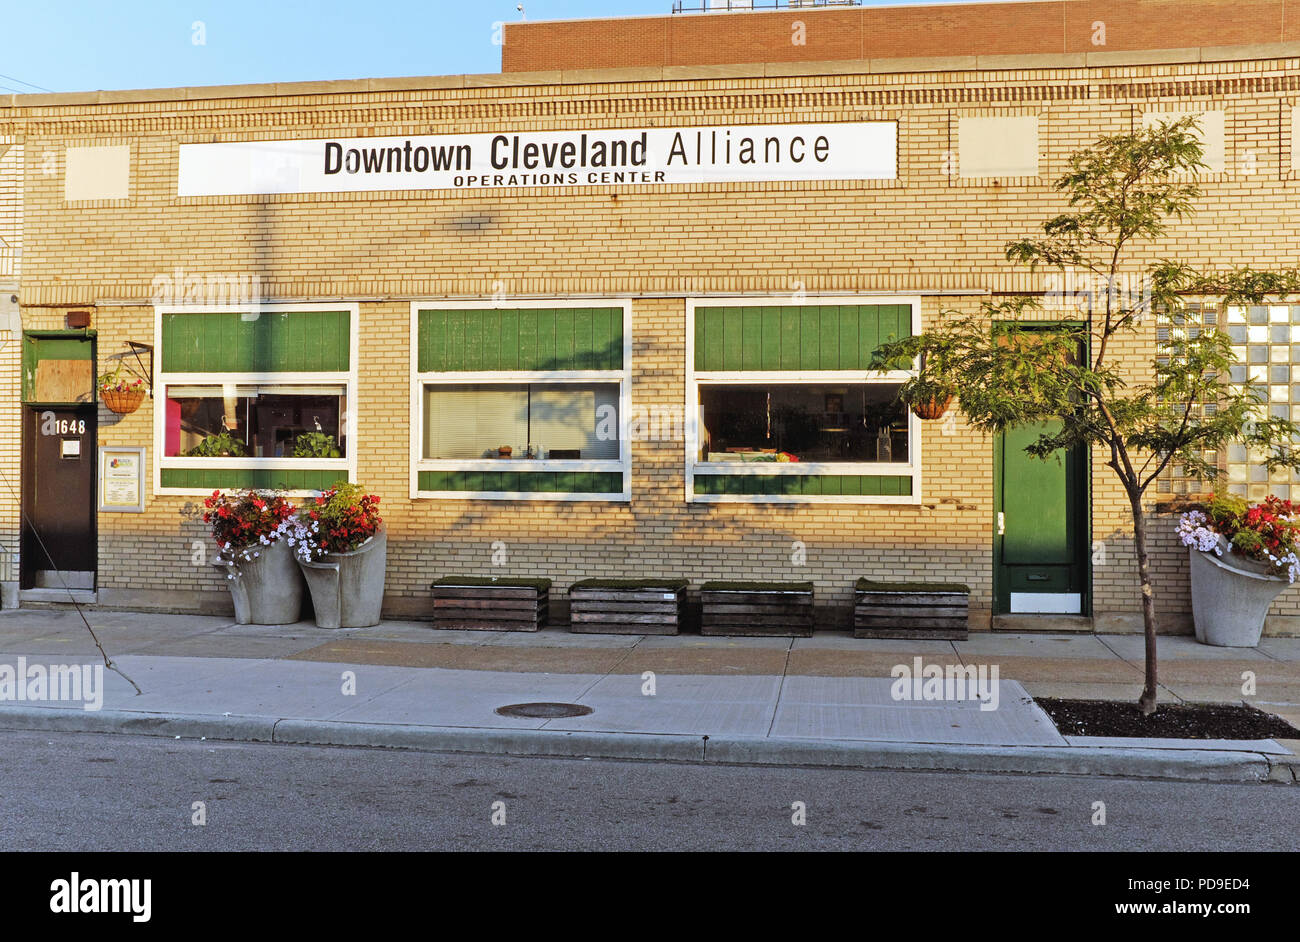 The Downtown Cleveland Alliance operations center on St. Clair Avenue in downtown Cleveland, Ohio, USA. Stock Photo